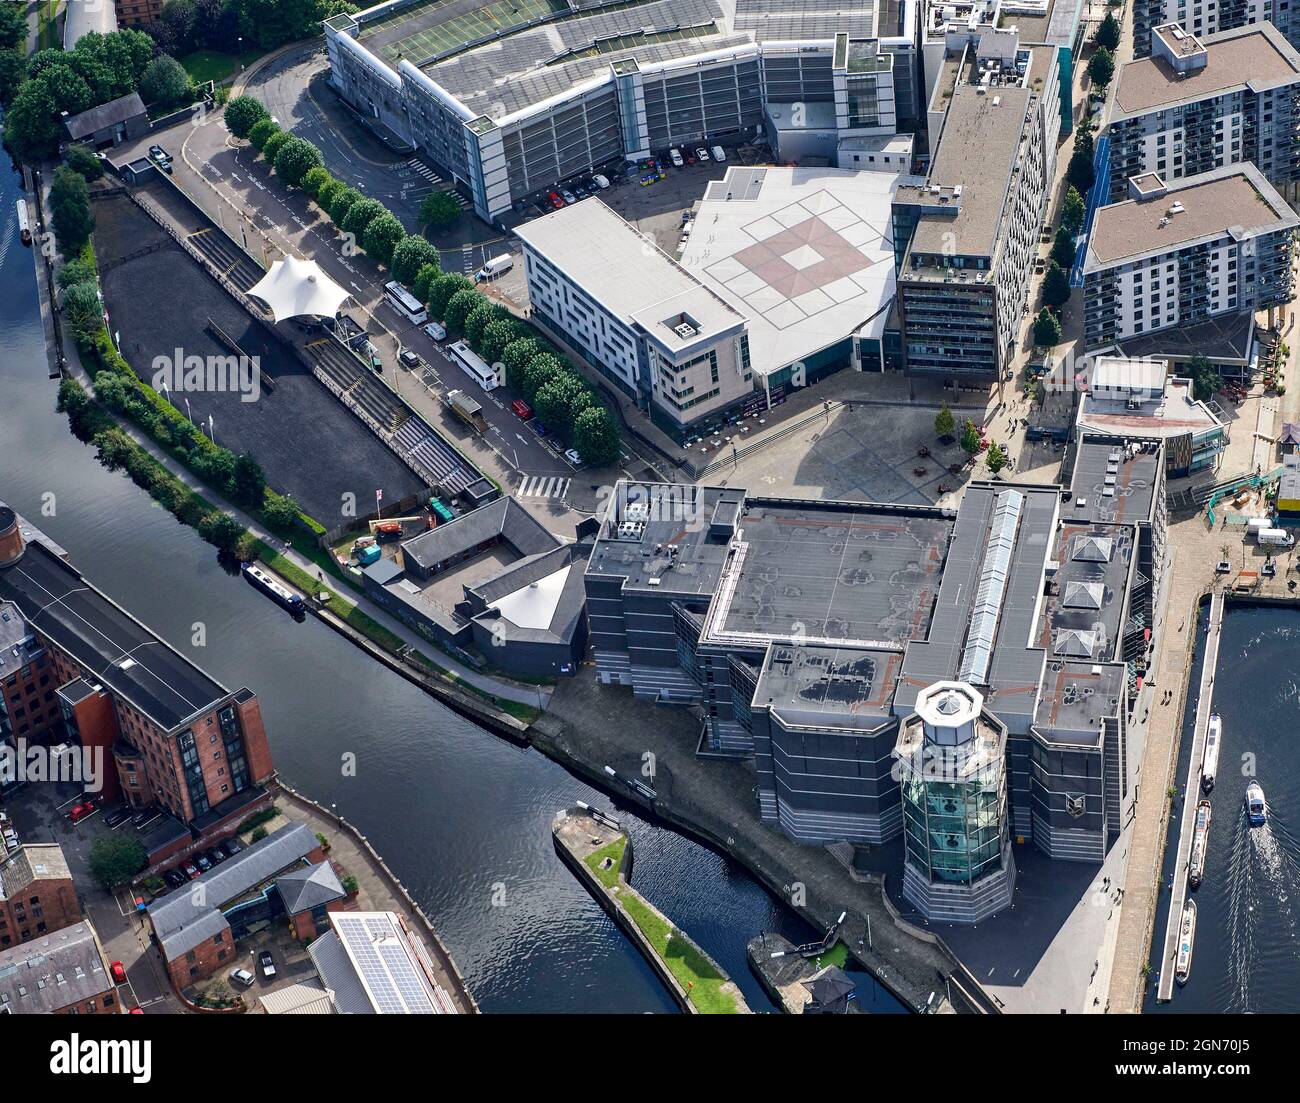 The Royal Armouries and Clarance Dock from the air, Leeds City Centre, West Yorkshire, Northern England, UK Stock Photo